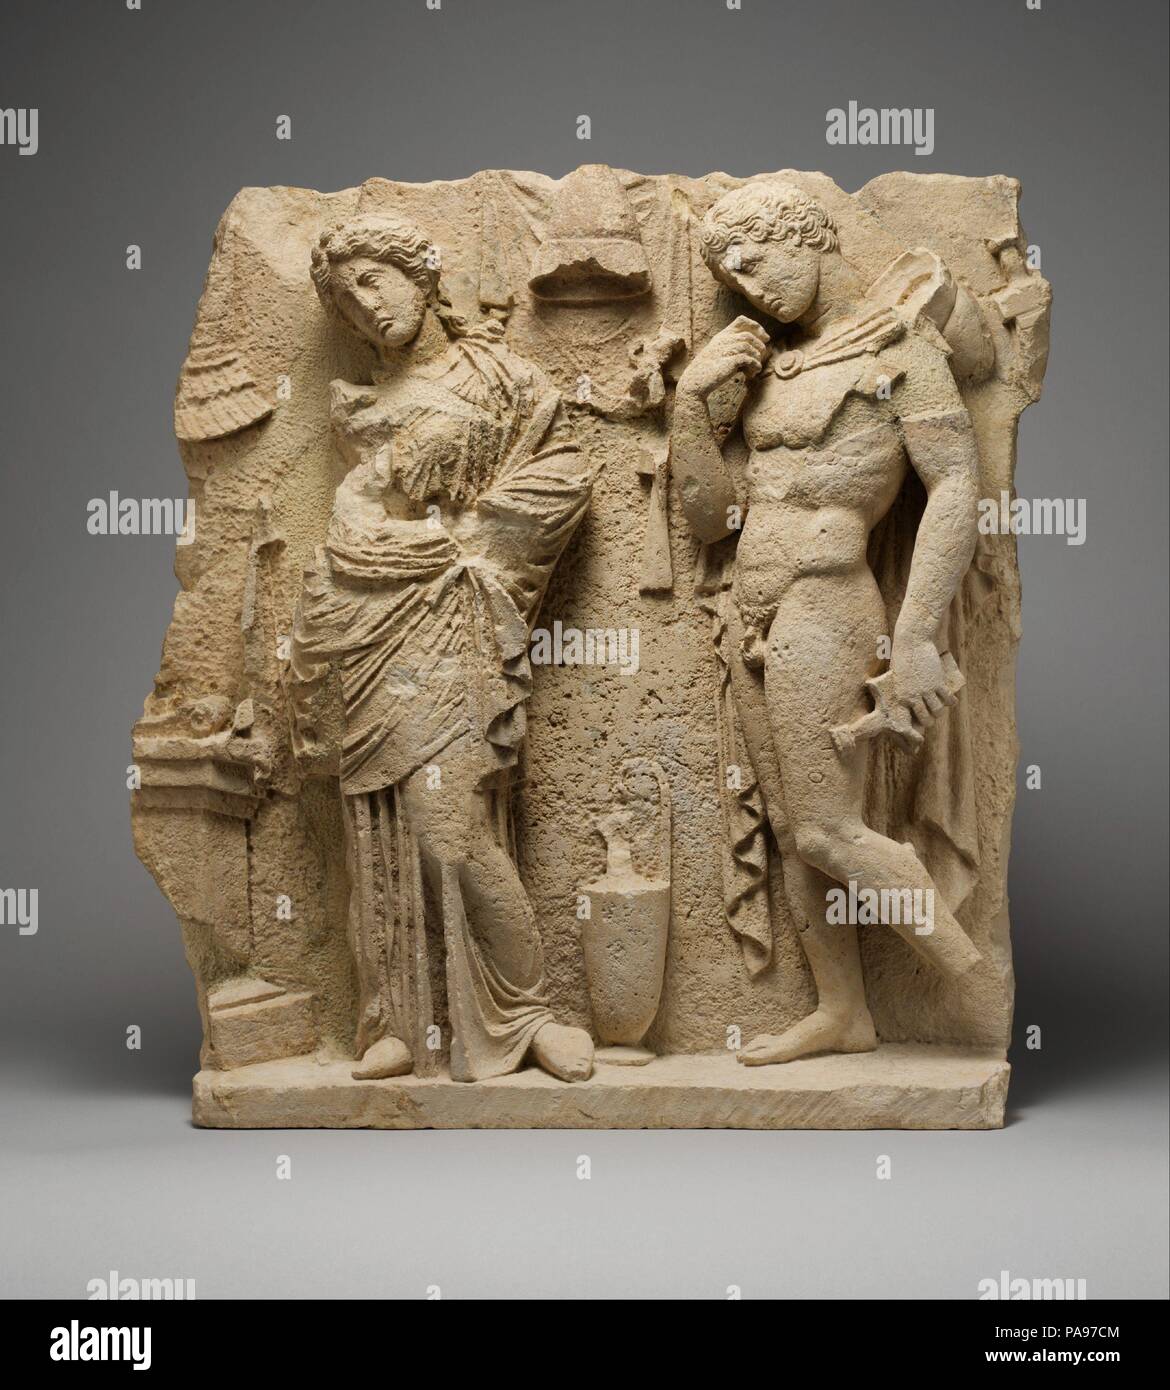 Limestone funerary relief. Culture: Greek, South Italian, Tarentine. Dimensions: H. 23 1/16 in. (58.5 cm); width as preserved 21 1/8 in. (53.6 cm). Date: ca. 325-300 B.C..  Tarentum (modern Taranto) was a wealthy Greek colony on the southeast coast of Italy, a pivotal location along the trade routes between Greece and Italy. During the fourth century B.C., ostentatious grave monuments in the form of small temple-like buildings decorated with painted sculpture filled the city cemetery. This relief must come from such a building. It represents a young warrior and a woman standing by an altar. Be Stock Photo